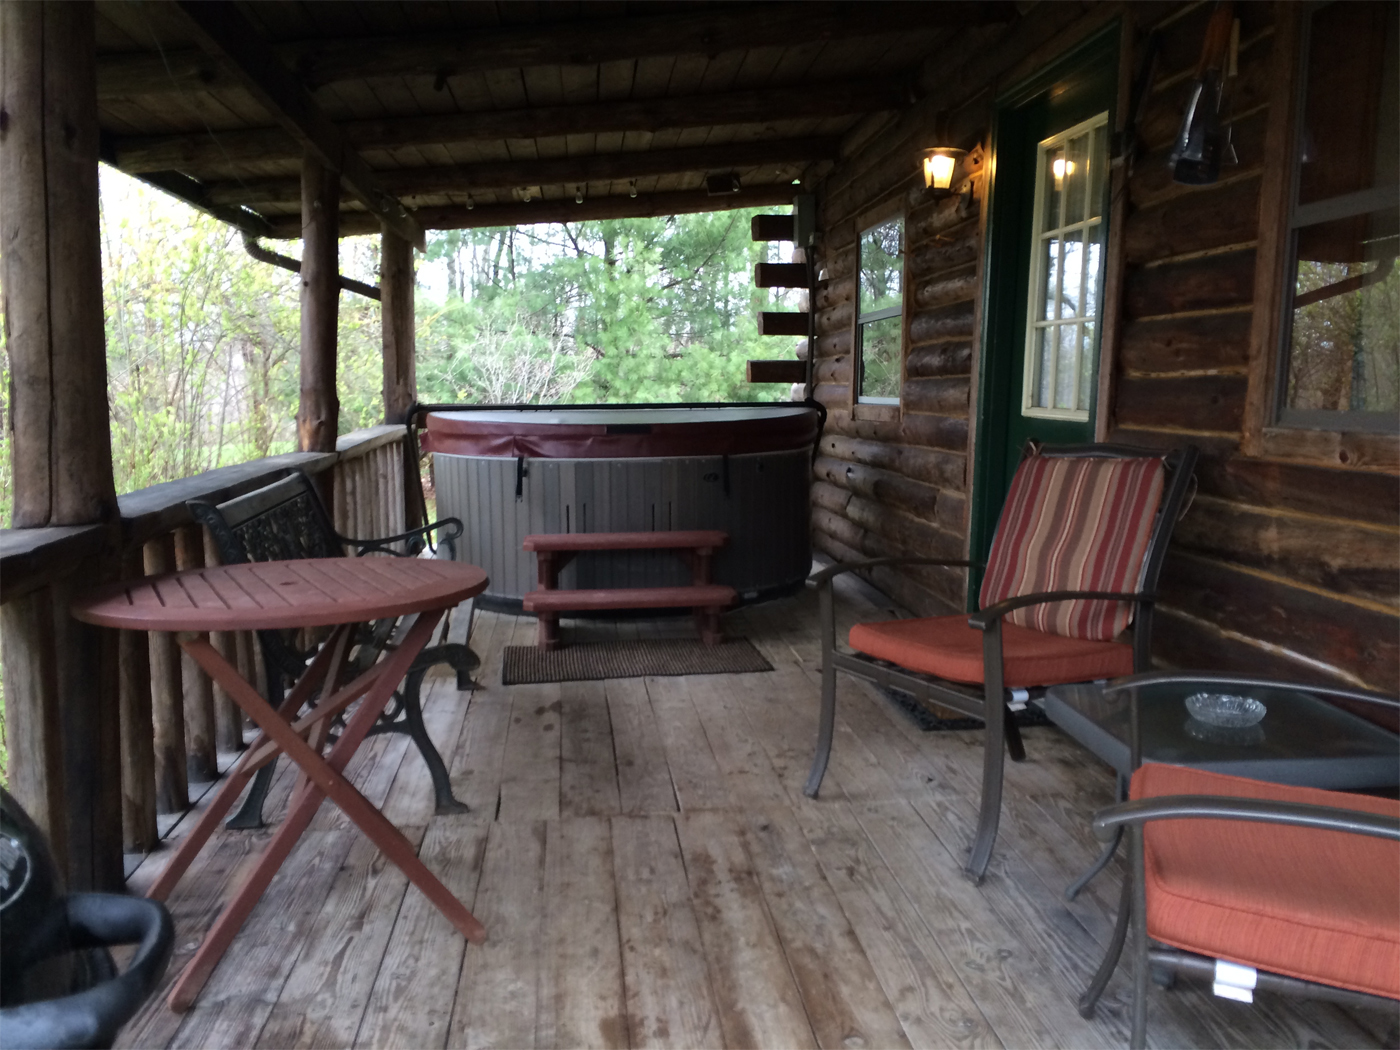 porch, chairs